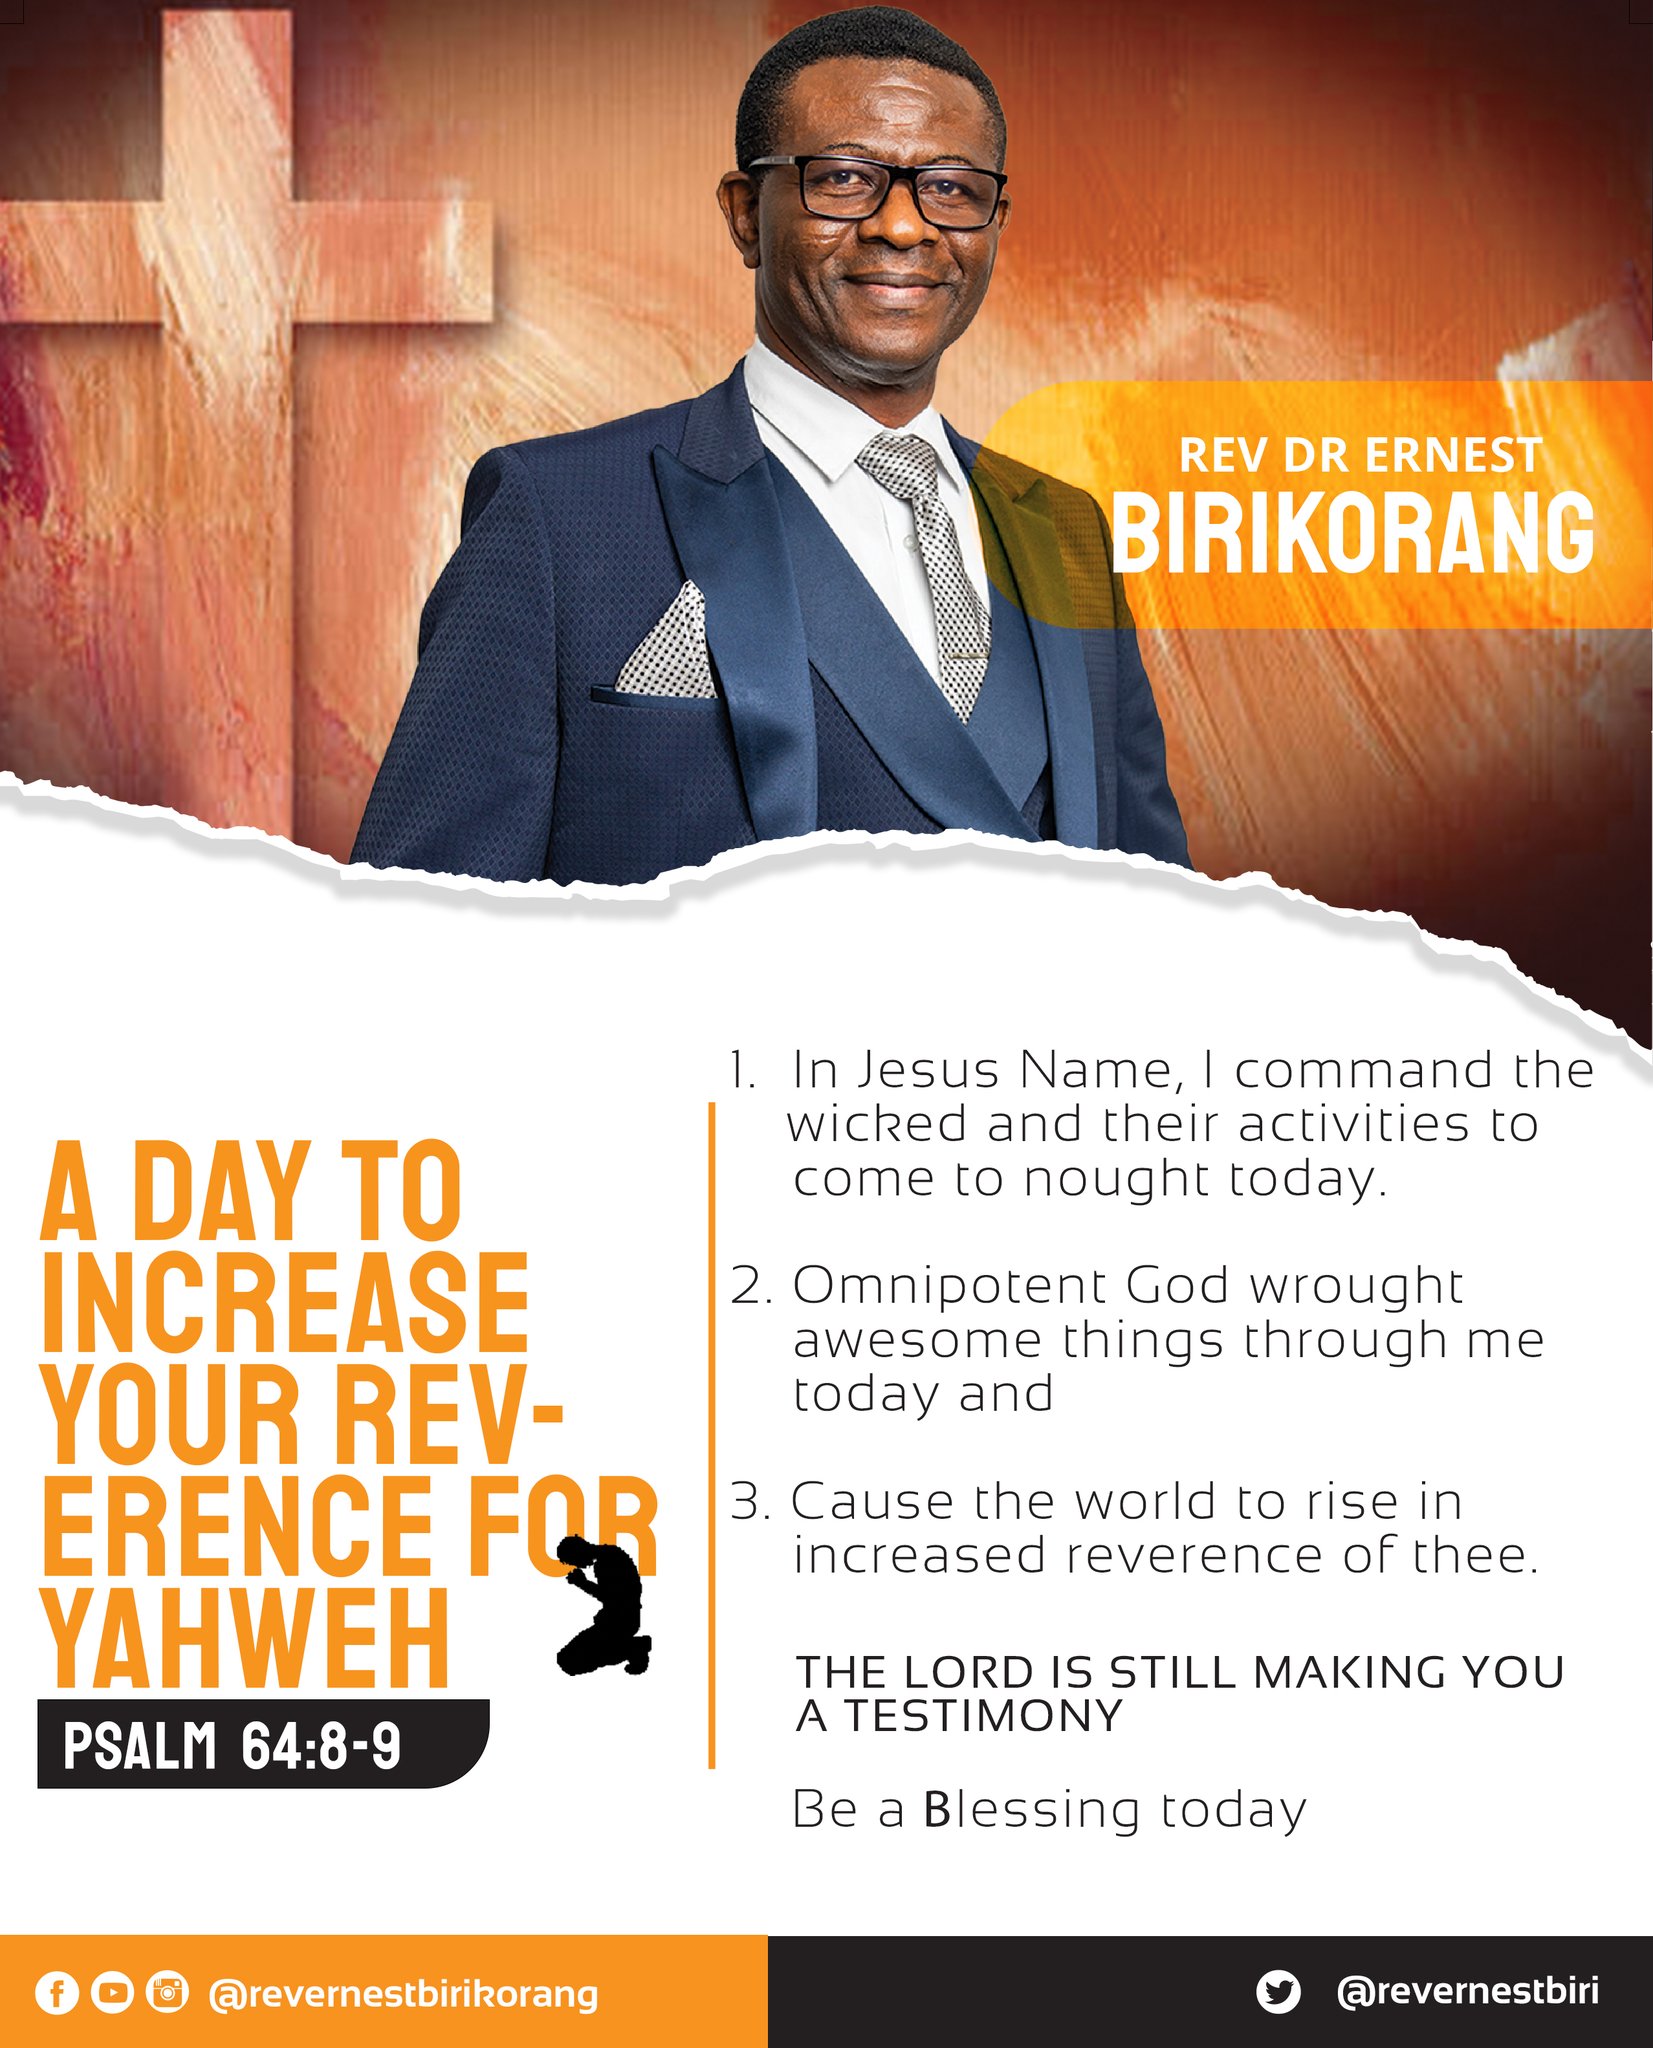 REV DR ERNEST BIRIKORANG  In Jesus Name command the wicked and their activities [0 A DAY TO come t0 nought today. INCREASE 2. Omnipotent God wrought awesome things through me YOUR REV- today and ERENCE FOR 3. Cause the world t0 rise in increased reverence of thee YAHWEH THE LORD IS STILL MAKING YOU A TESTIMONY PSALM 64.8-9 Be Blessing today 0 @ @revernestbirkorang @revernestbiri